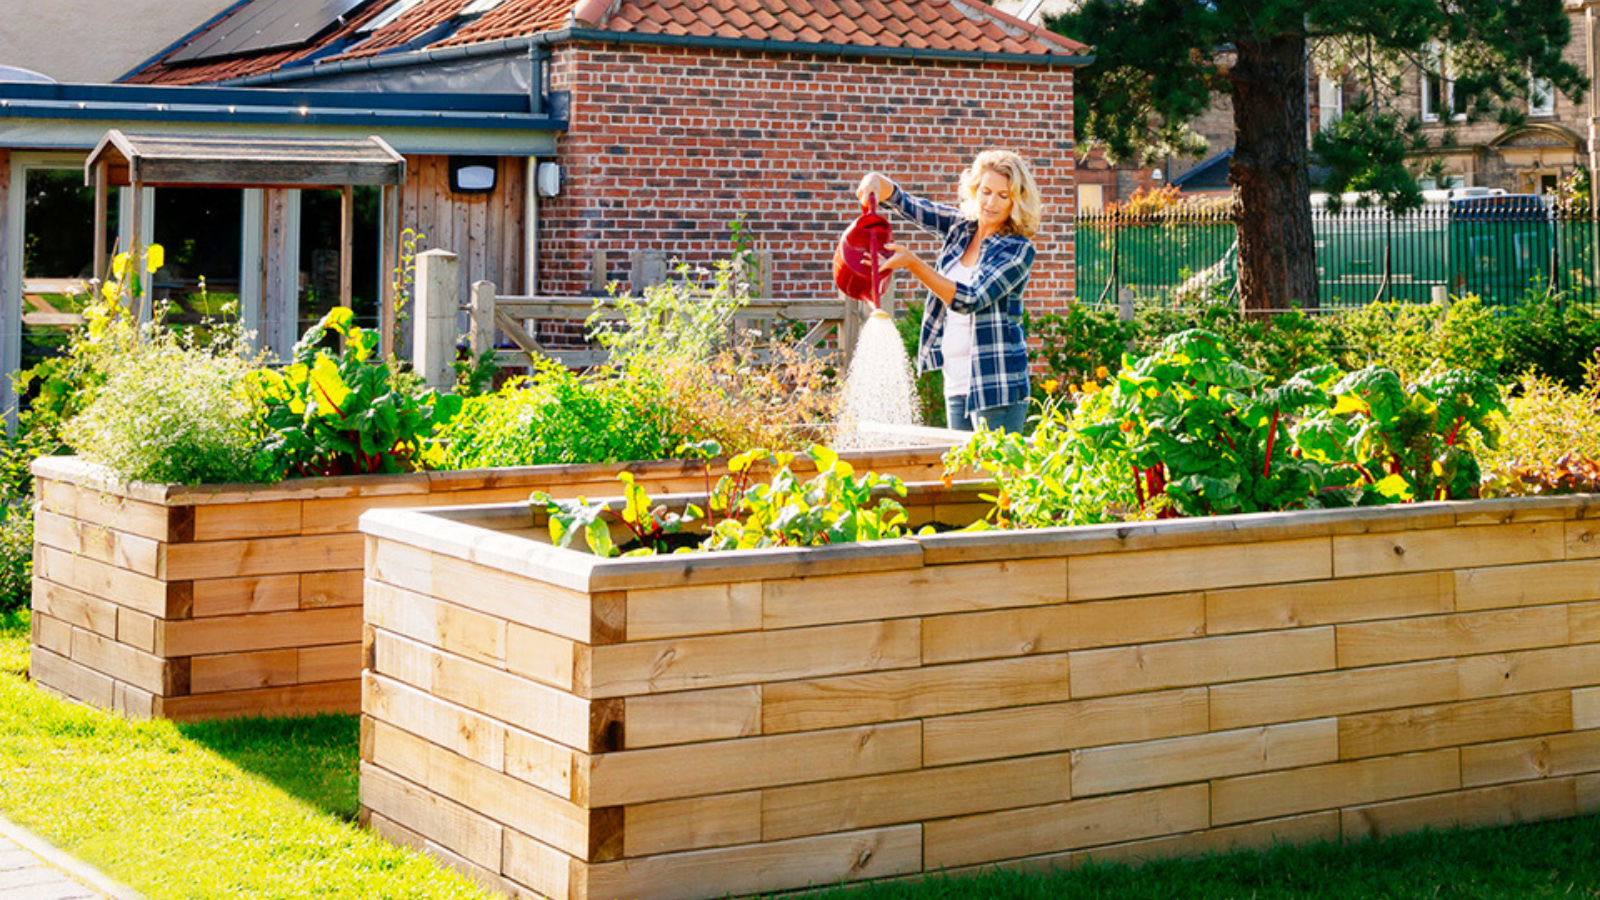 The benefits of using raised beds